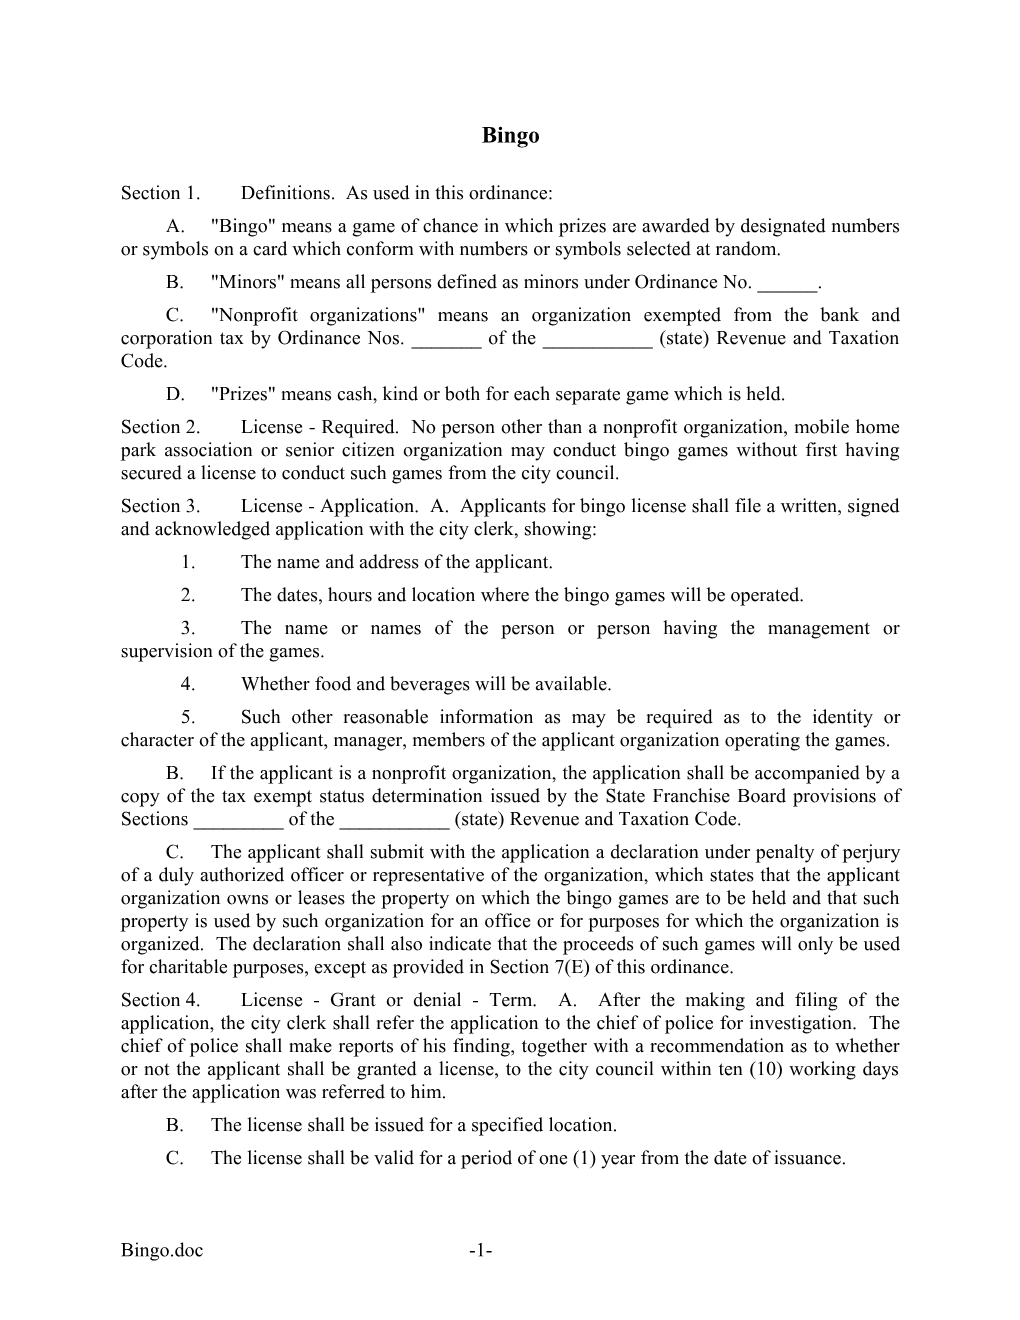 Section 1.Definitions. As Used in This Ordinance